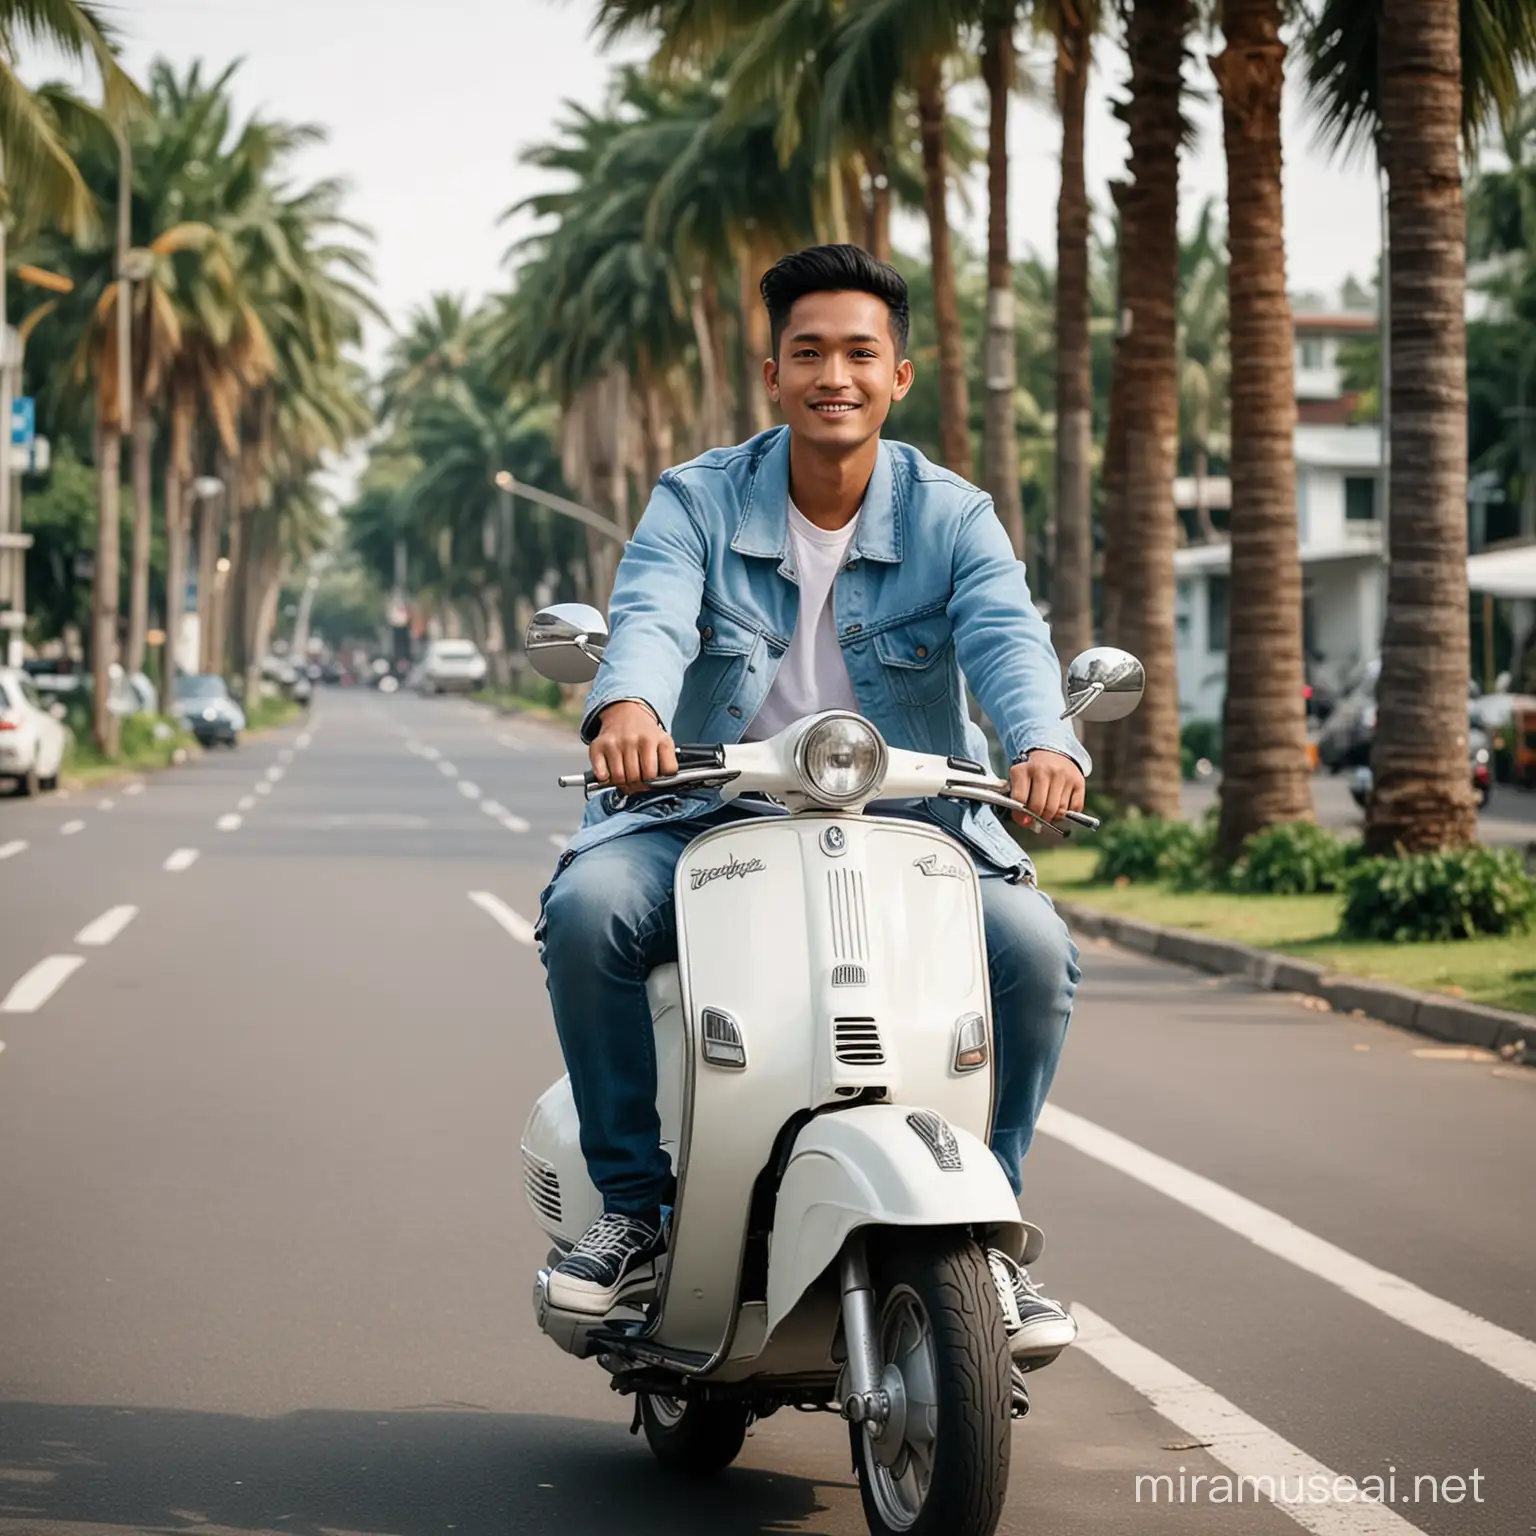 Youthful Indonesian Rider on Classic Vespa with Urban PalmLined Street